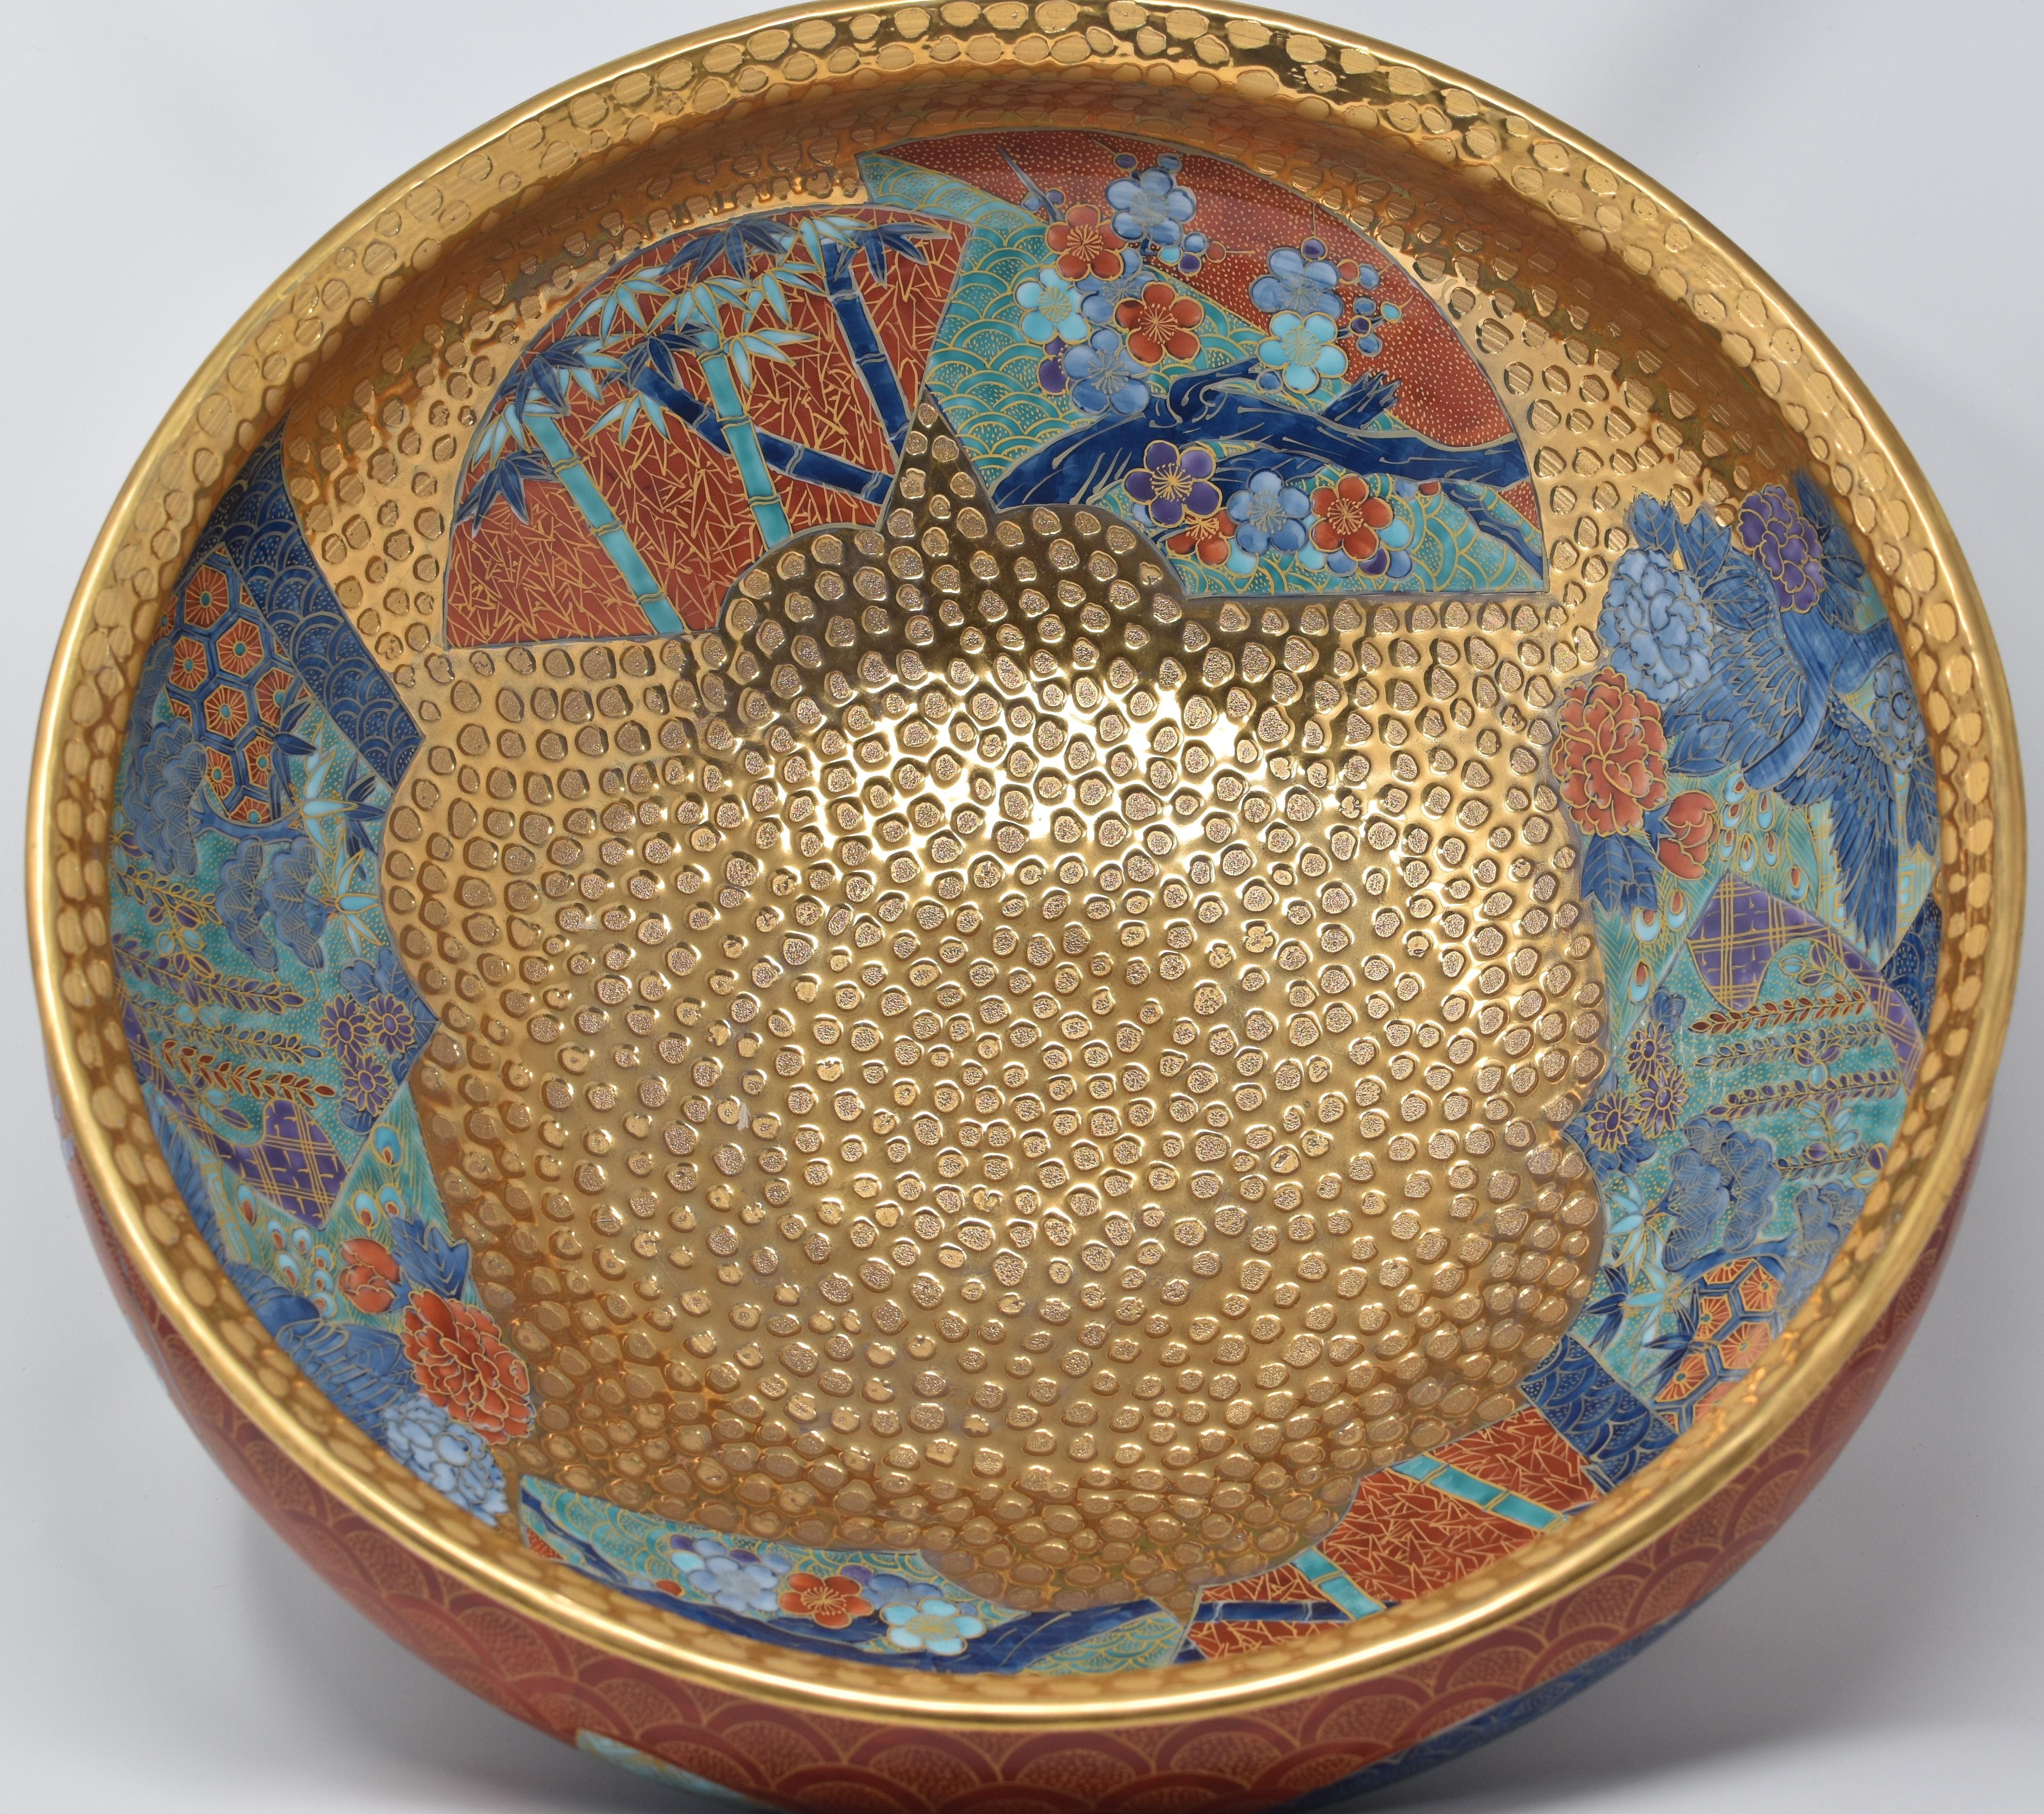 Highly collectible very large contemporary decorative porcelain bowl/centerpiece, an exhibition piece in red and dimpled gold, an outstanding masterpiece by widely respected award-winning Japanese master porcelain artist in the Imari-Arita style. In